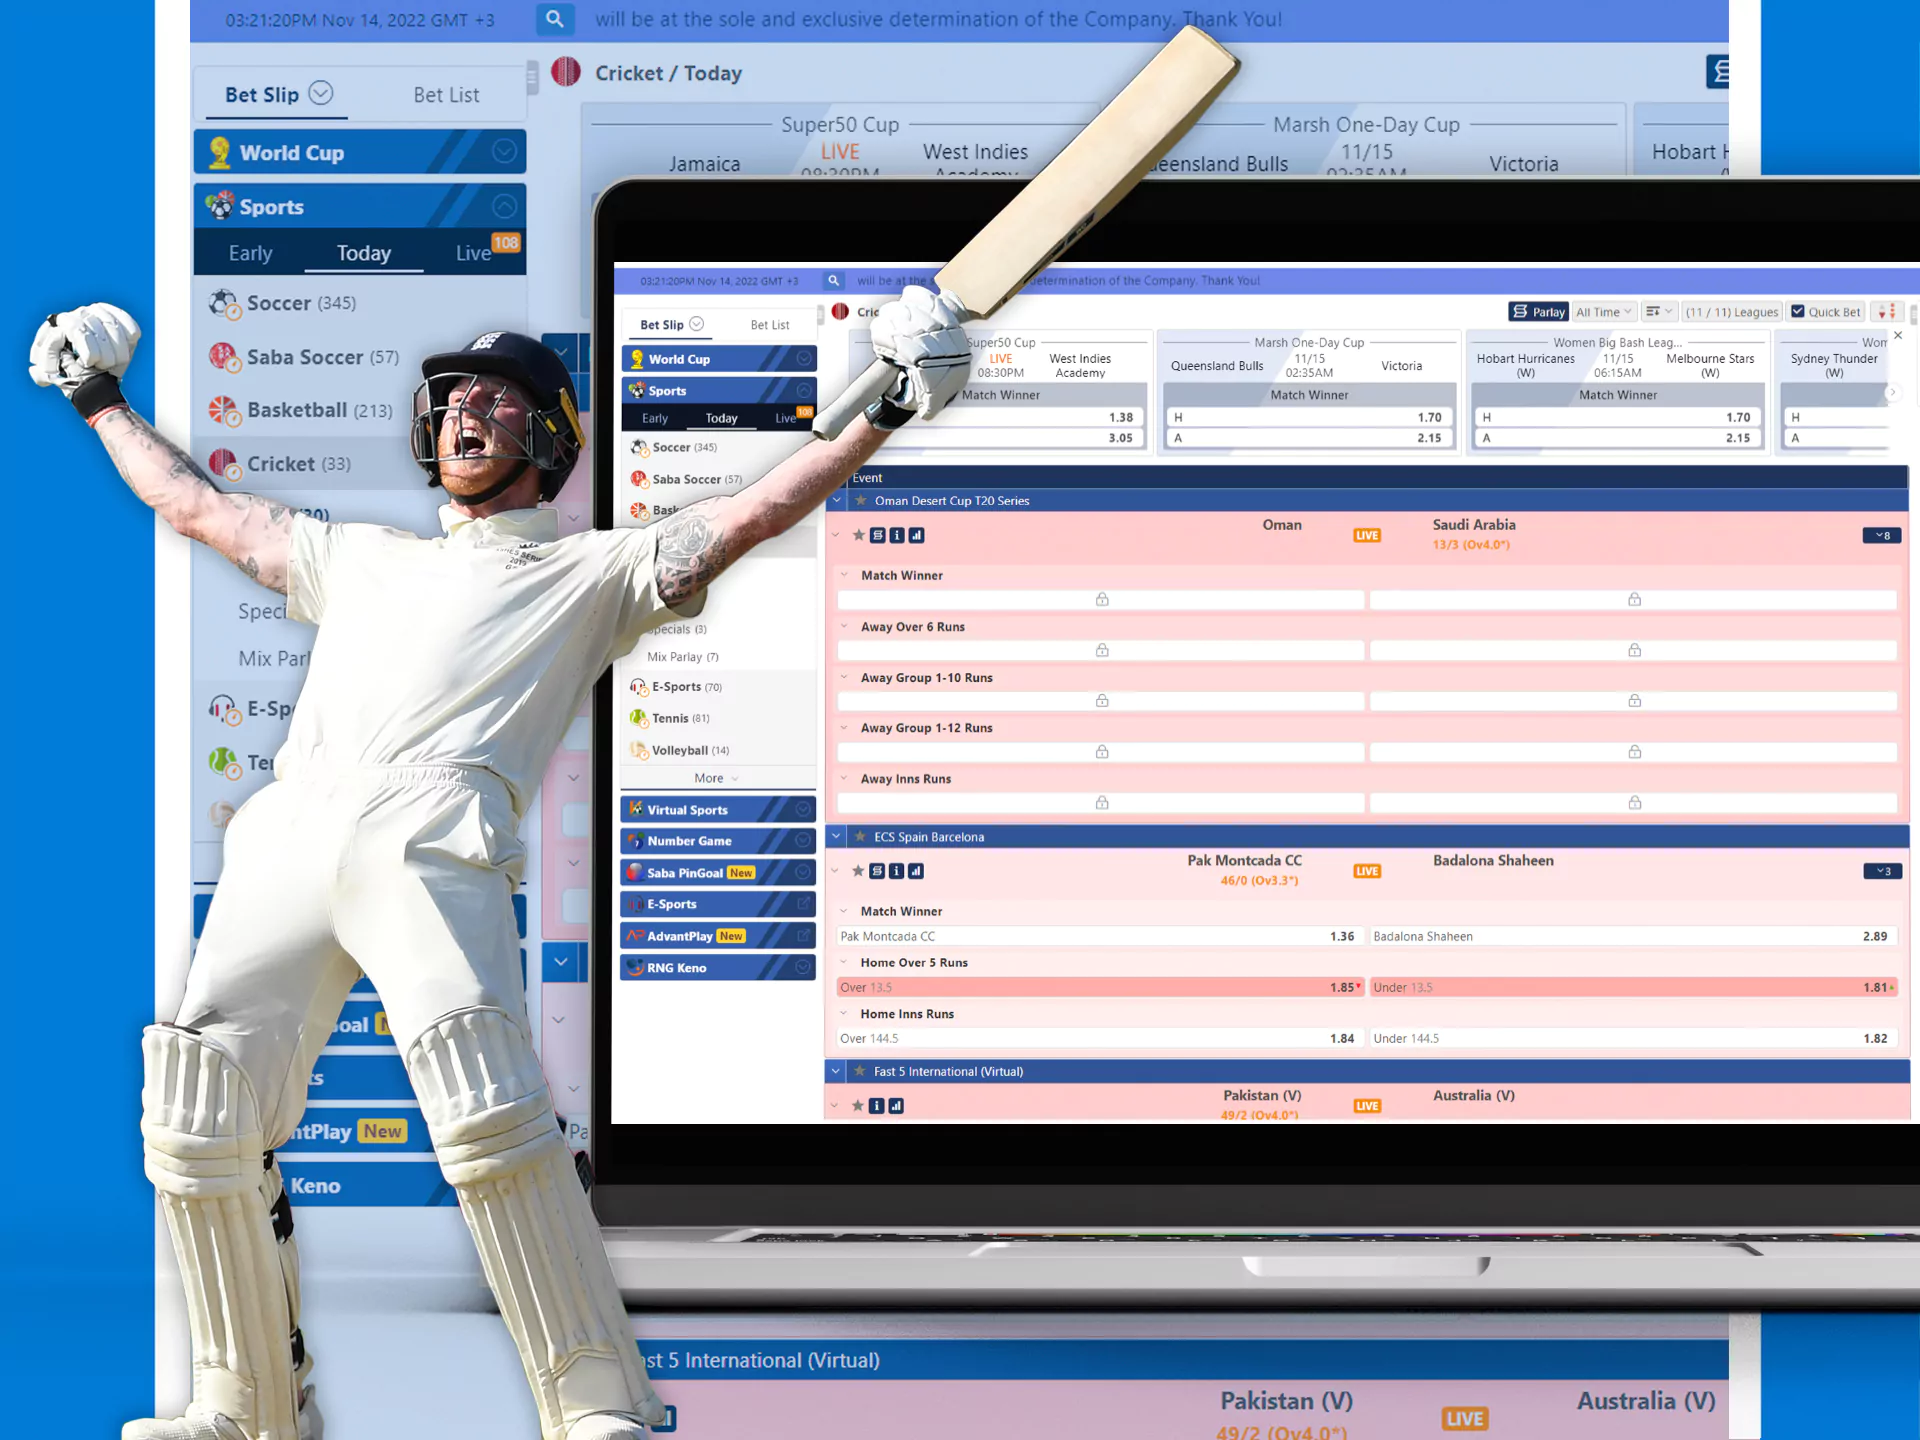 Visit the Crickex website, choose a match from the list and place a bet.